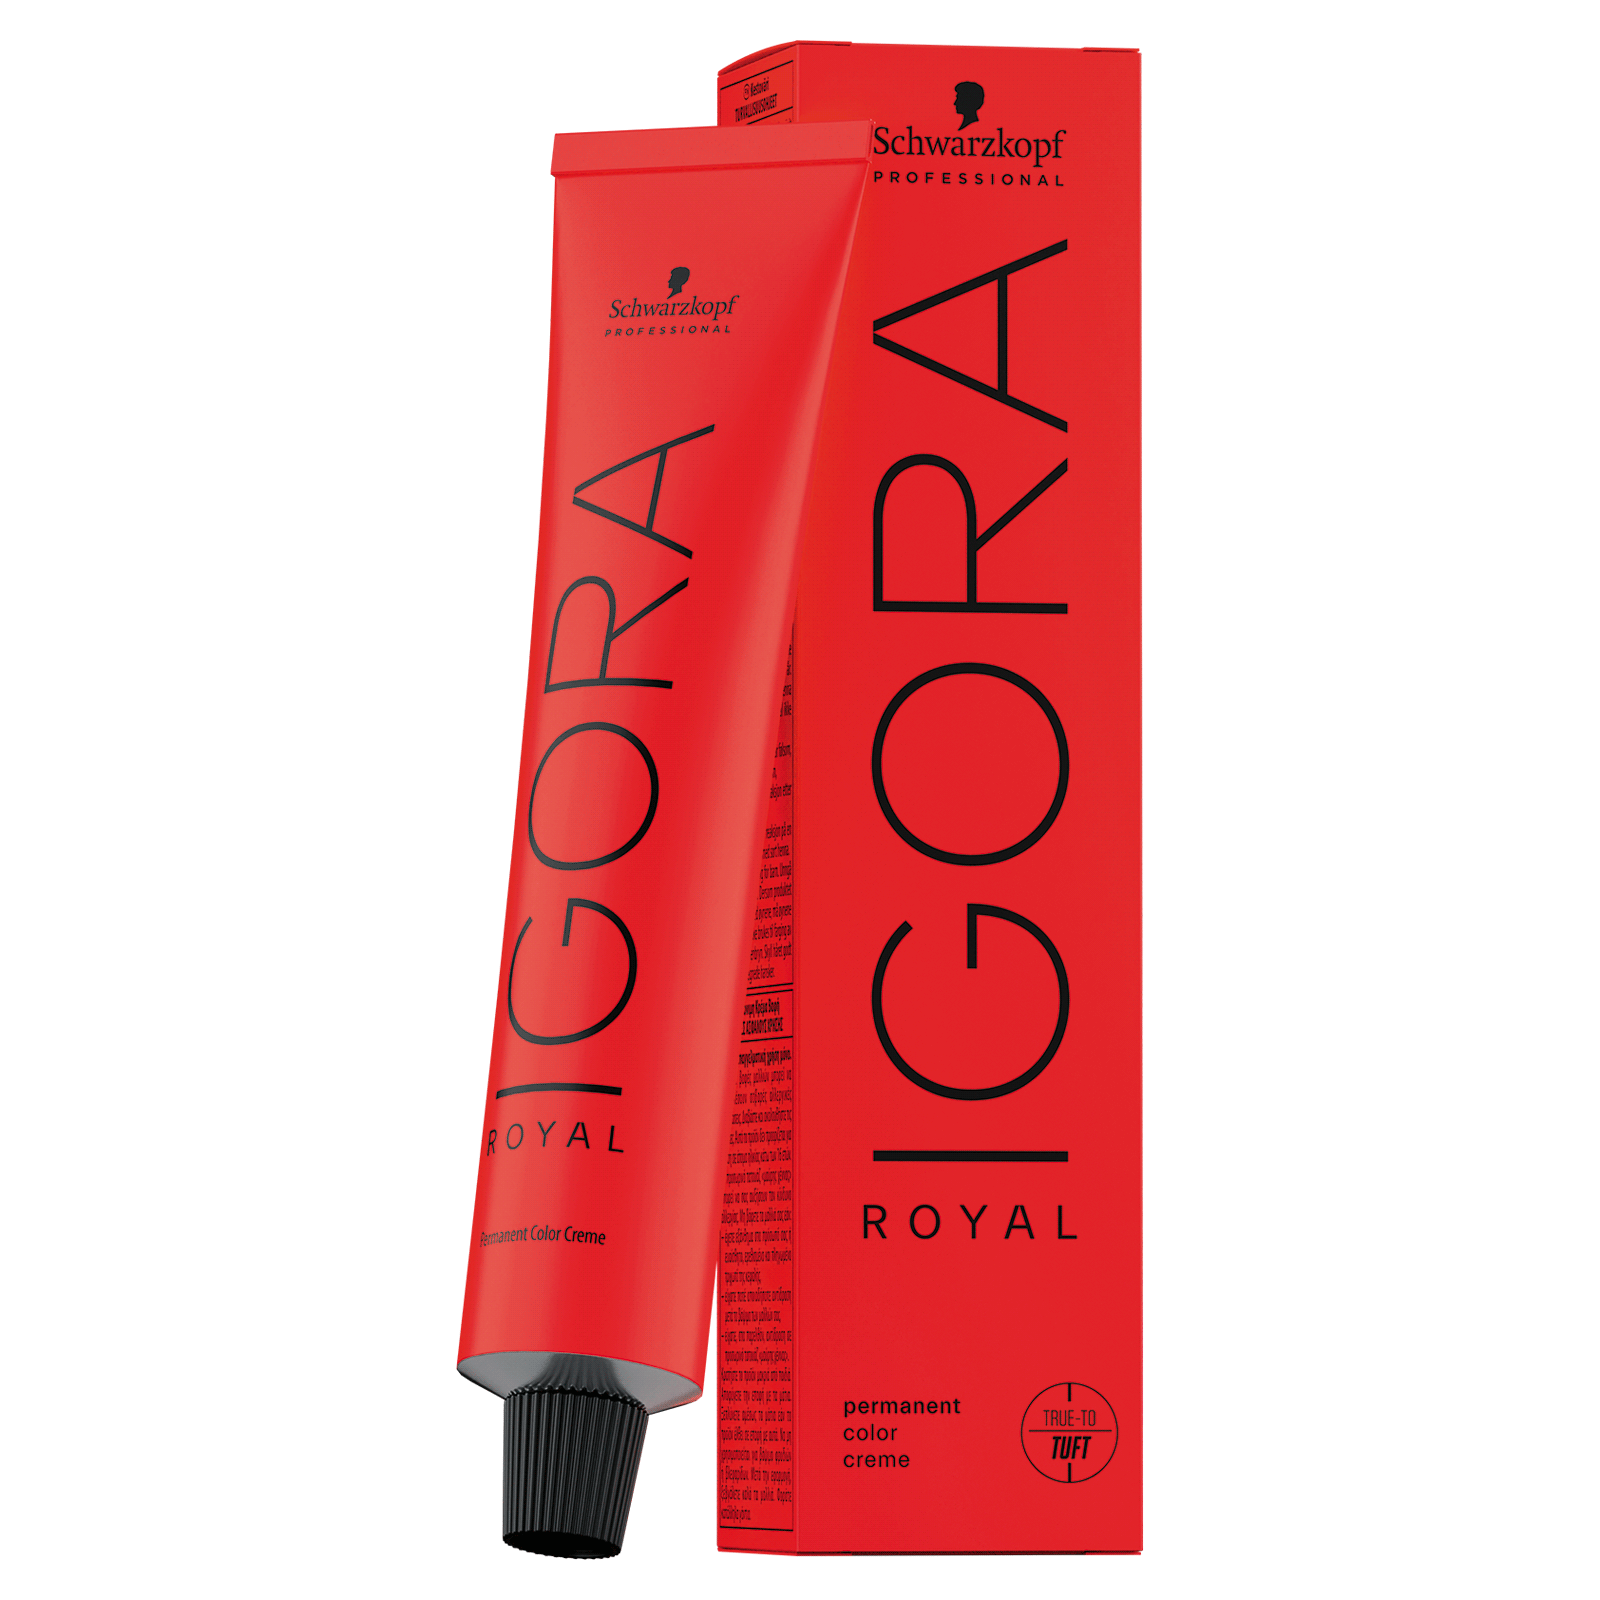 0 88 Red Concentrate Royal Schwarzkopf Professional